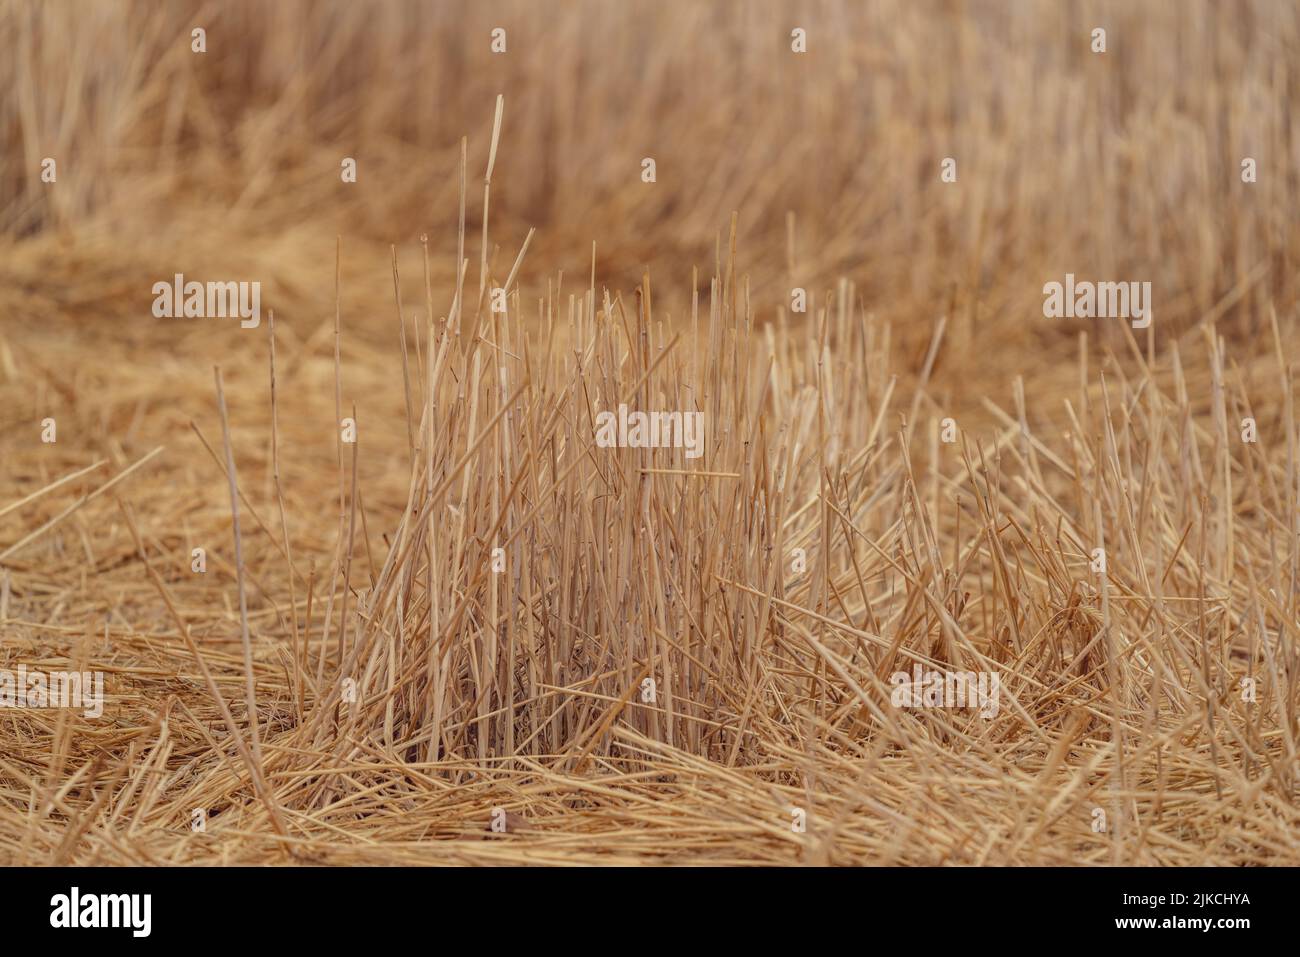 Cultivated wheat field straw over the land Stock Photo